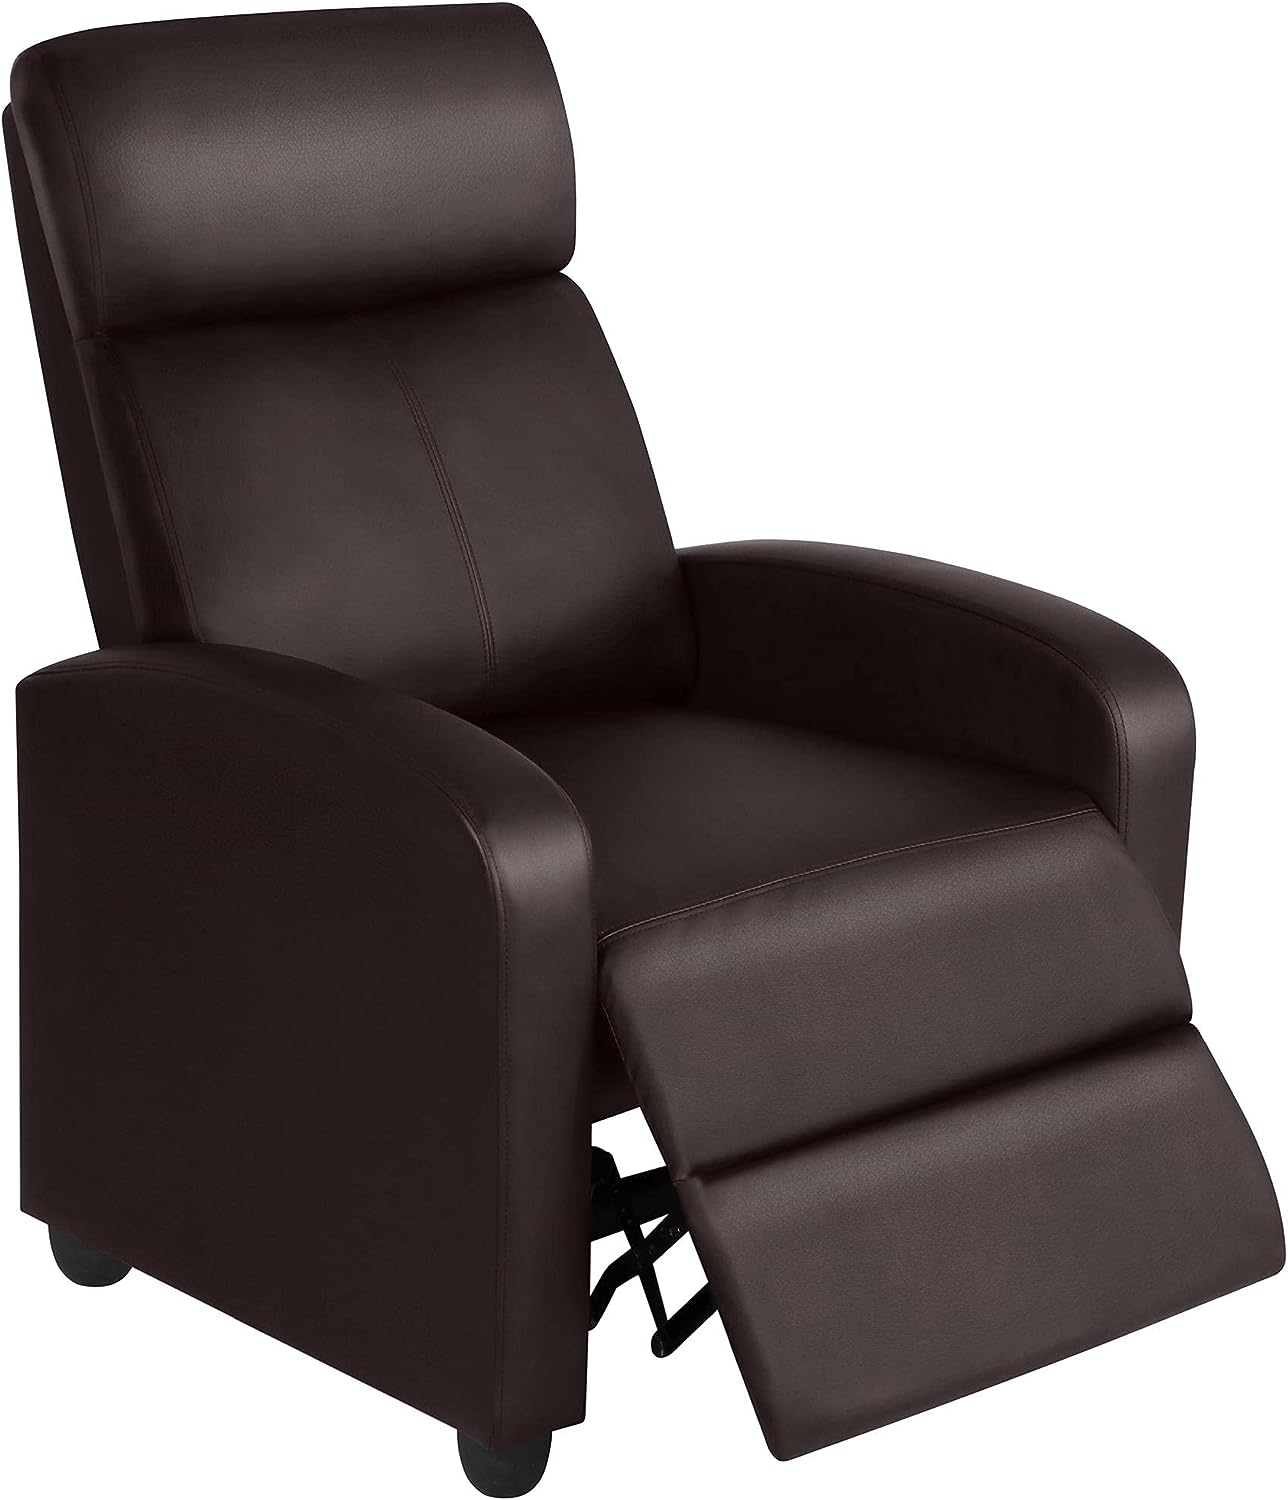 Topeakmart PU Leather Recliner Chair Living Room [...]